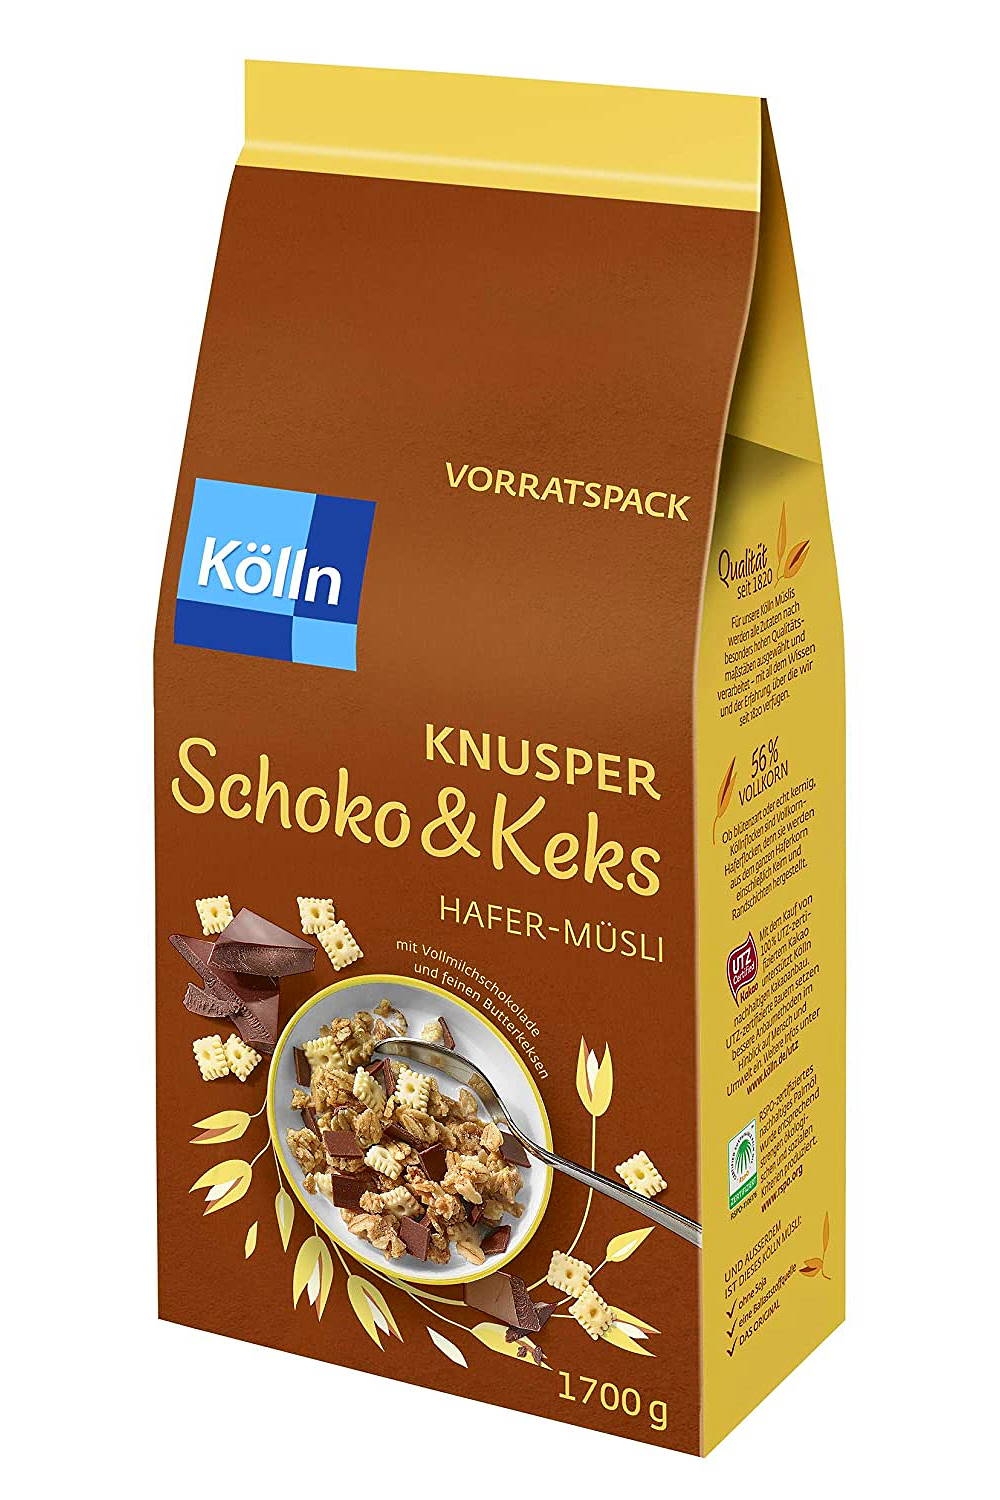 with biscuit 1.7 chocolate kg muesli Whole-wheat crispy and Kölln